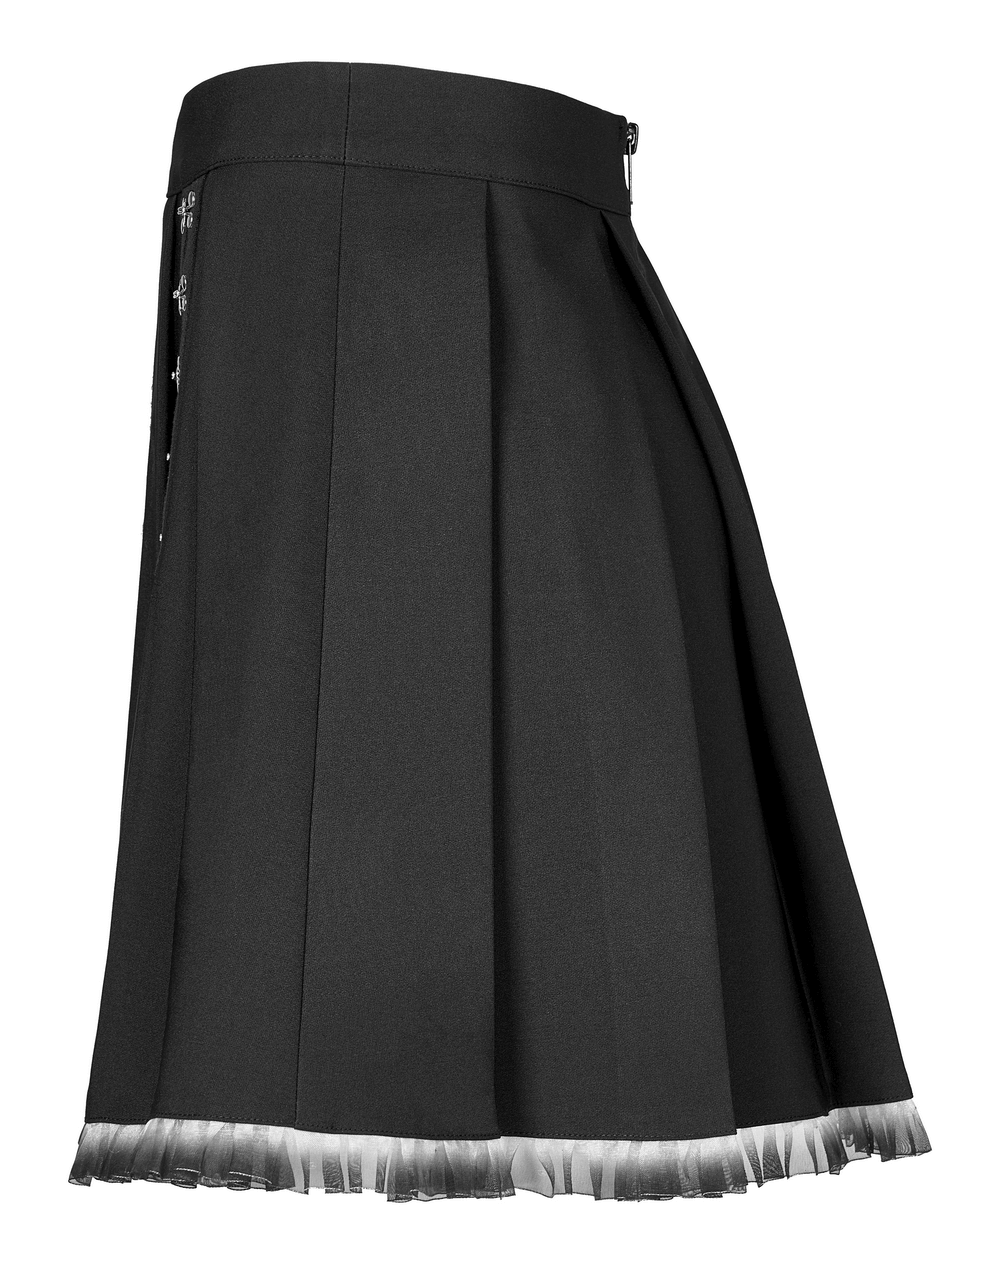 Black A-Line Pleated Skirt with Lace Detail and Buckle